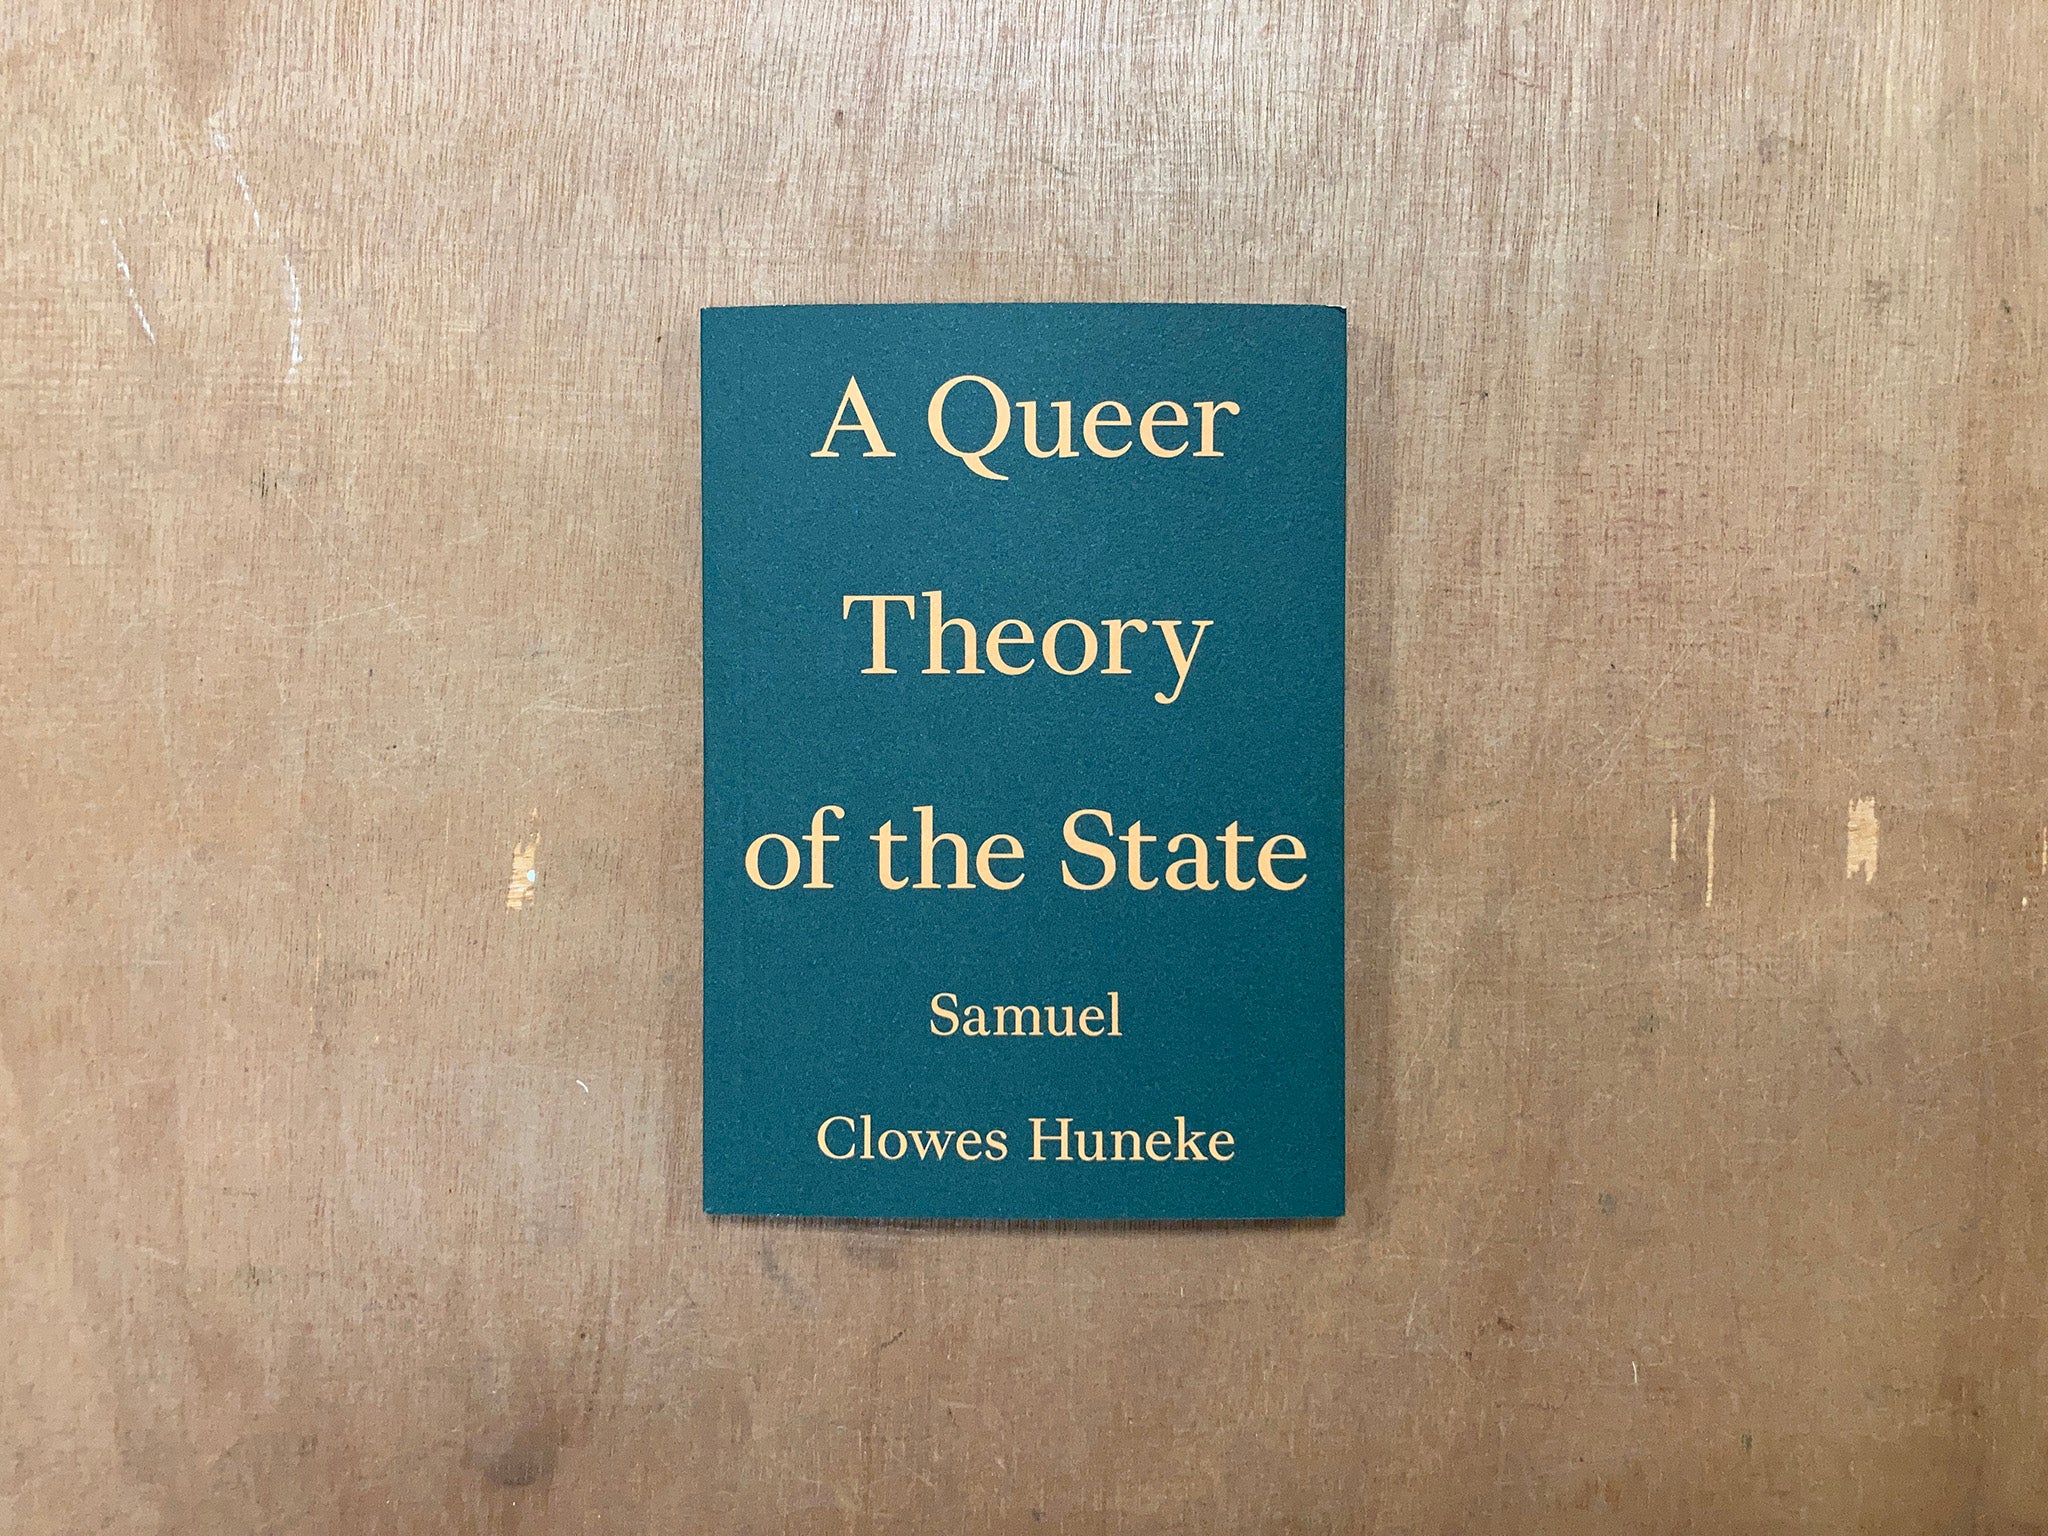 A QUEER THEORY OF THE STATE by Samuel Clowes Huneke